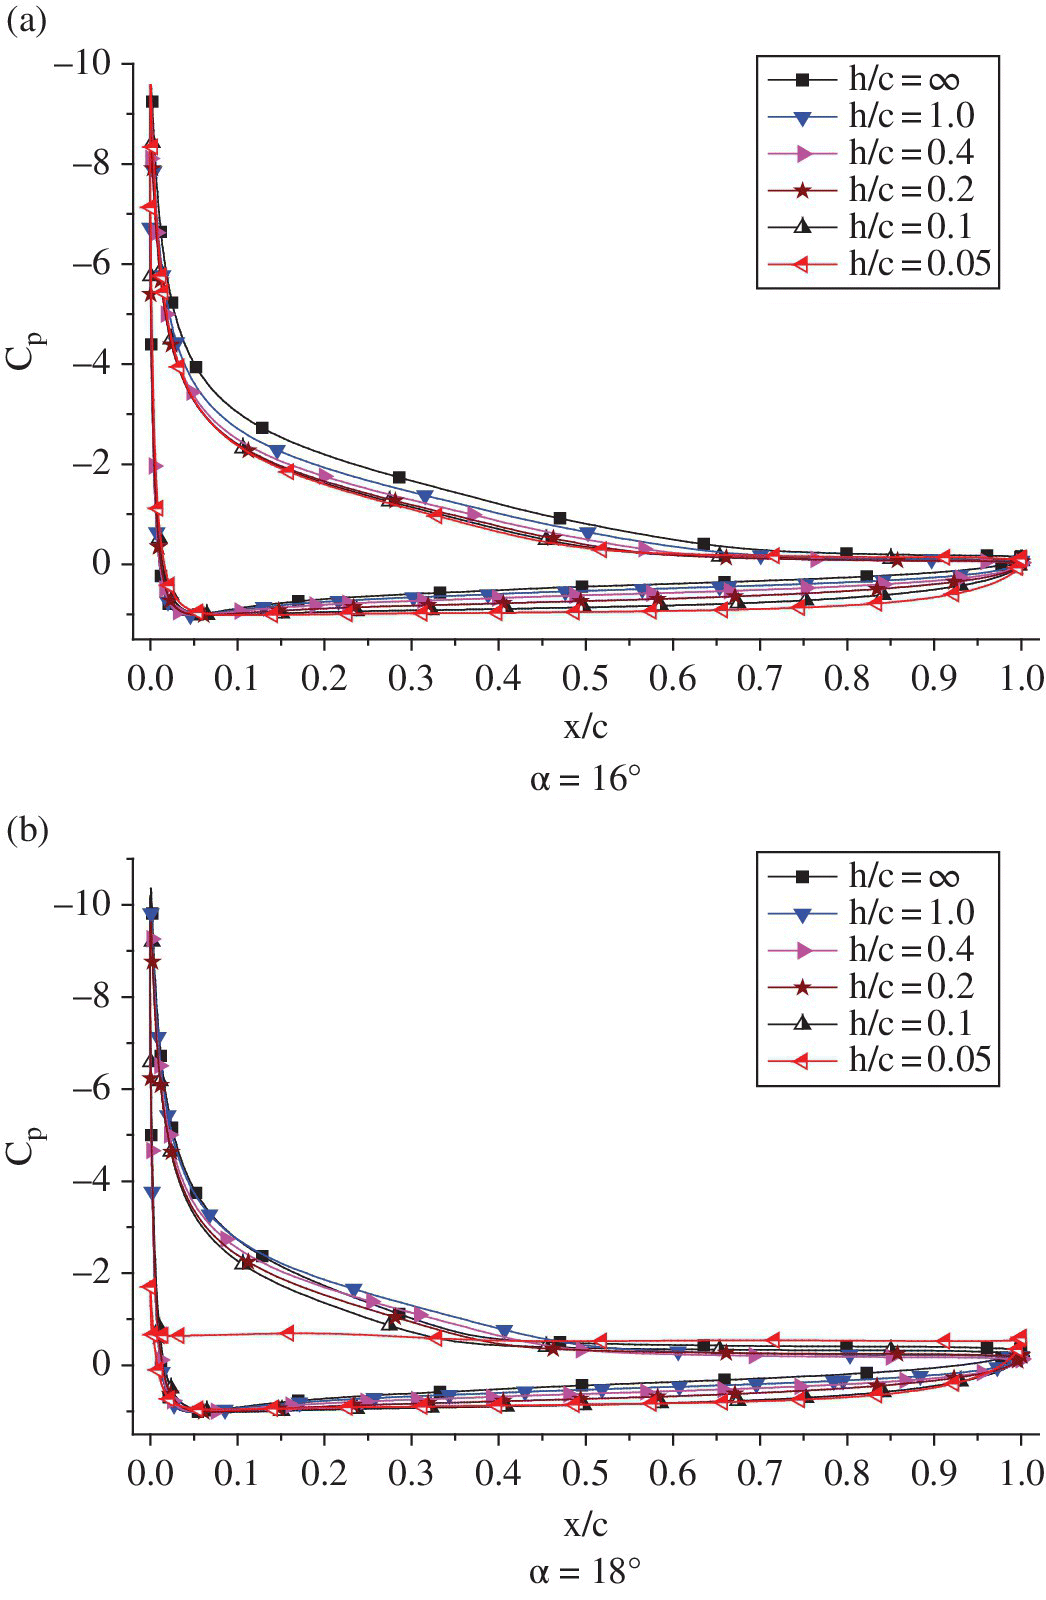 2 Graphs illustrating the pressure coefficient distributions on the NACA 4412 airfoil at various ride heights with 6 curves with markers for h/c = ∞, 1.0, 0.4, 0.2, 0.1, and 0.05.